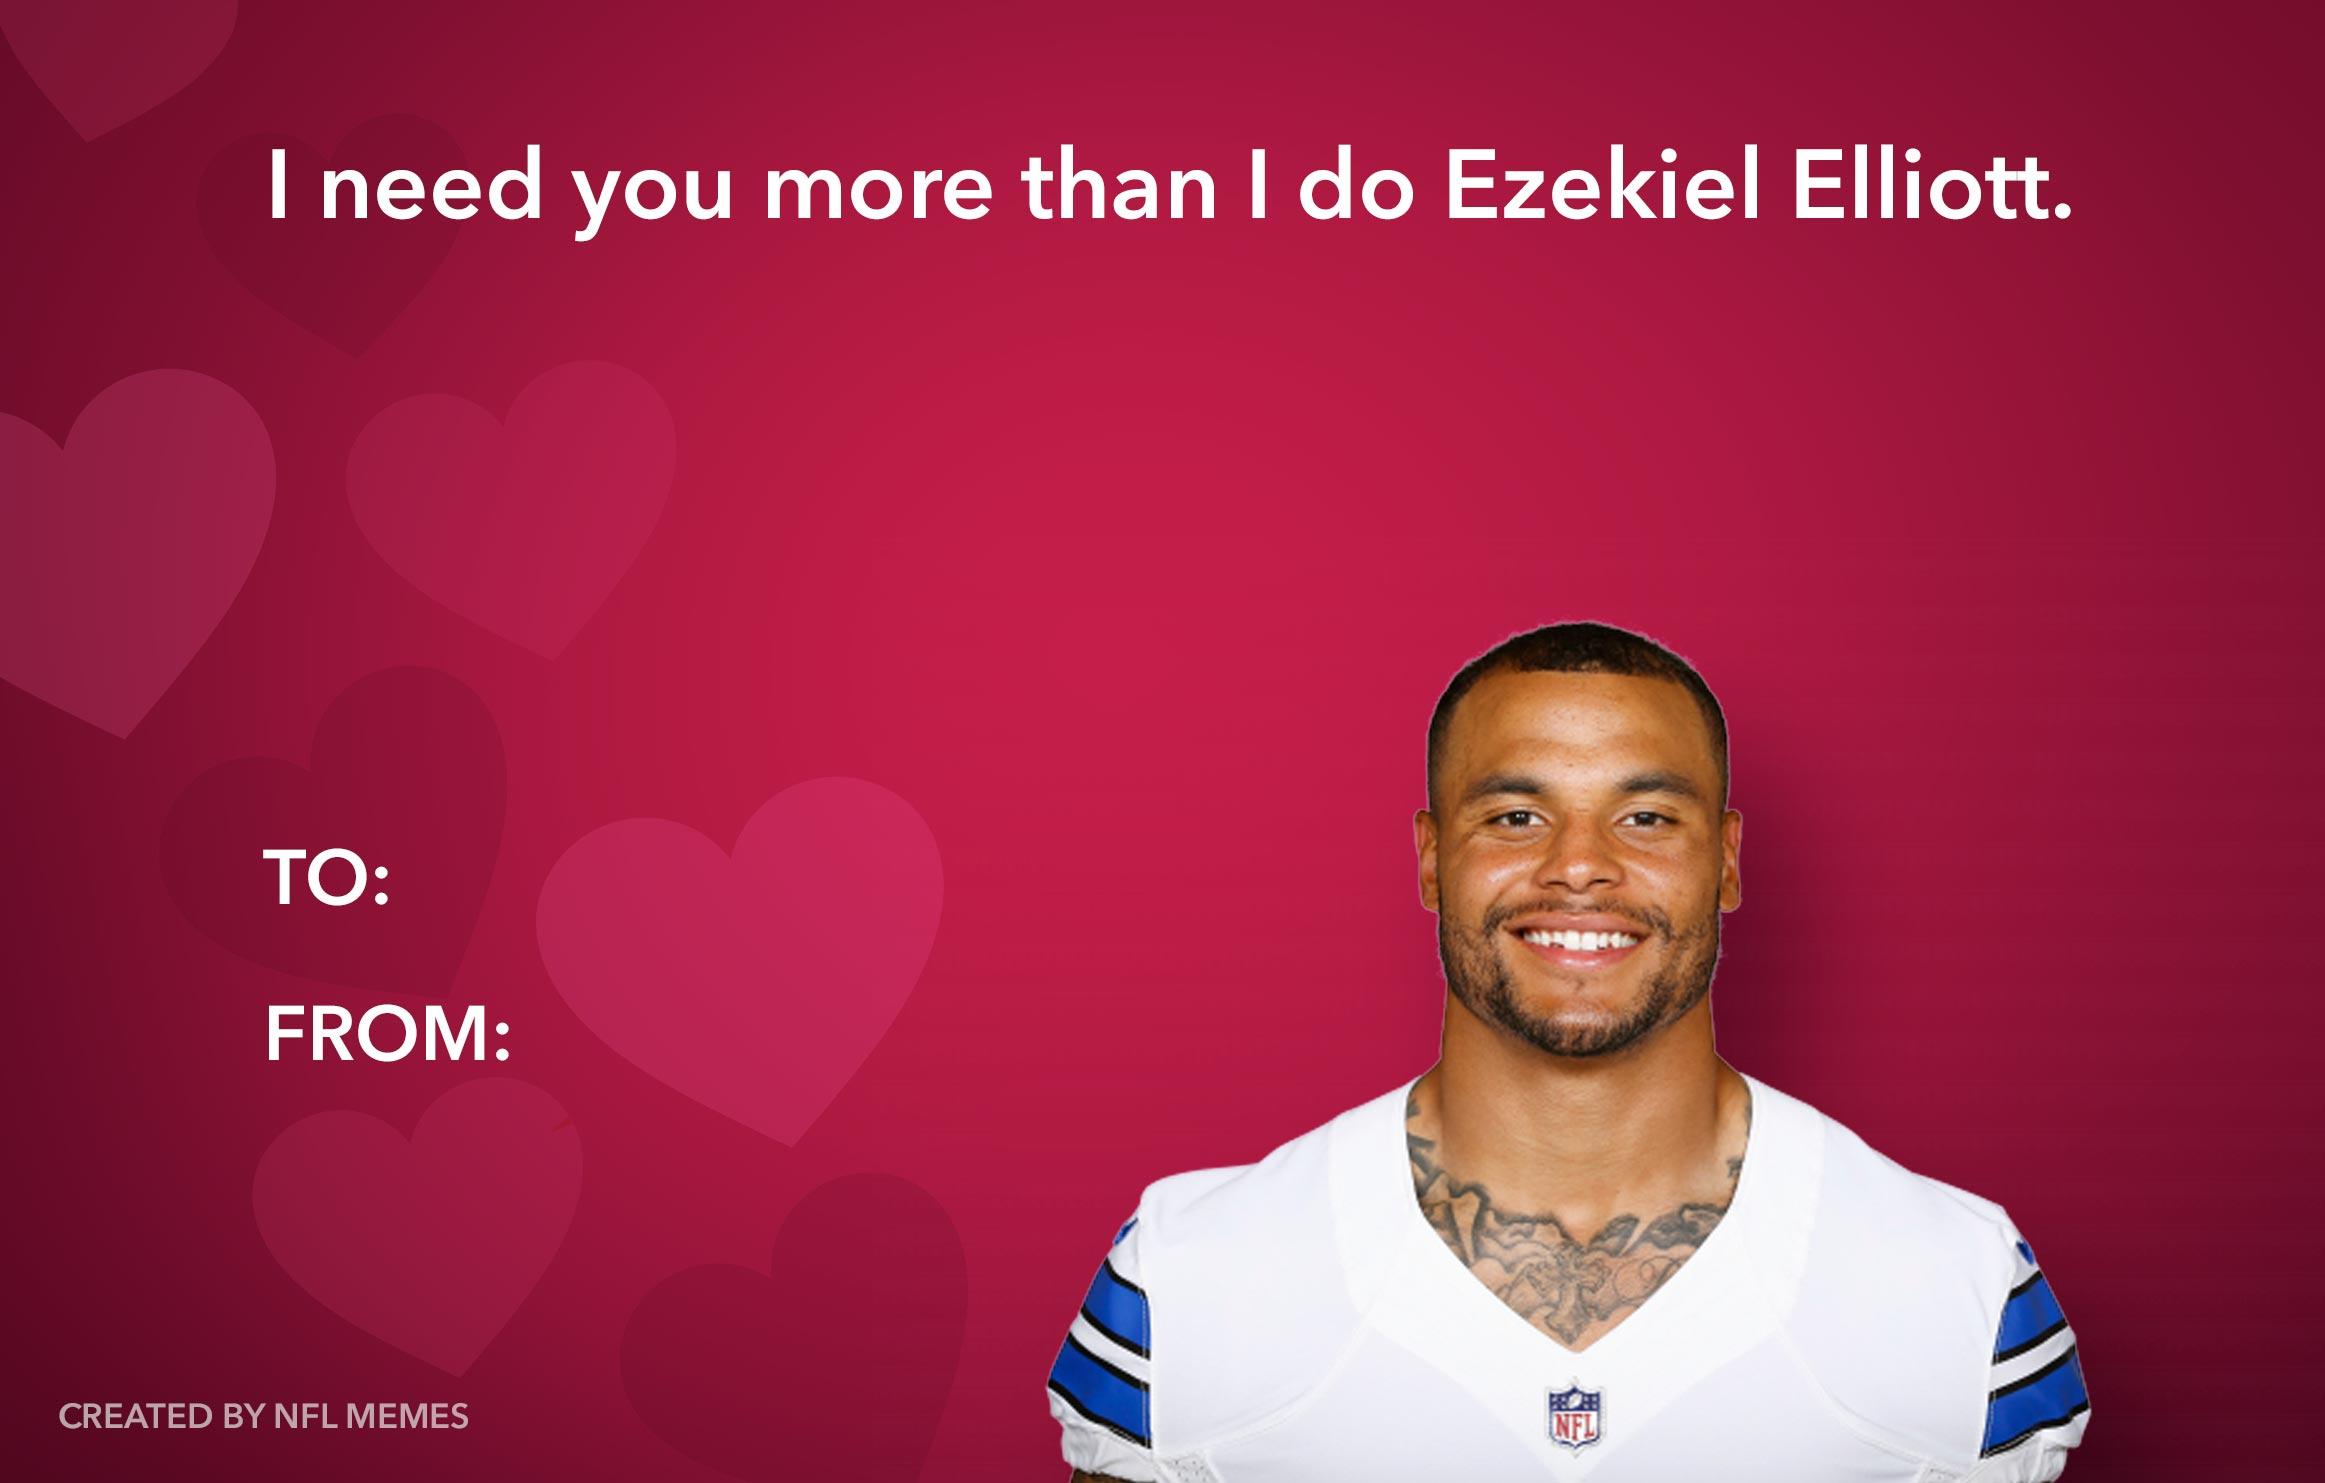 Heres This Years Batch Of Hilarious NFL Themed Valentines Day